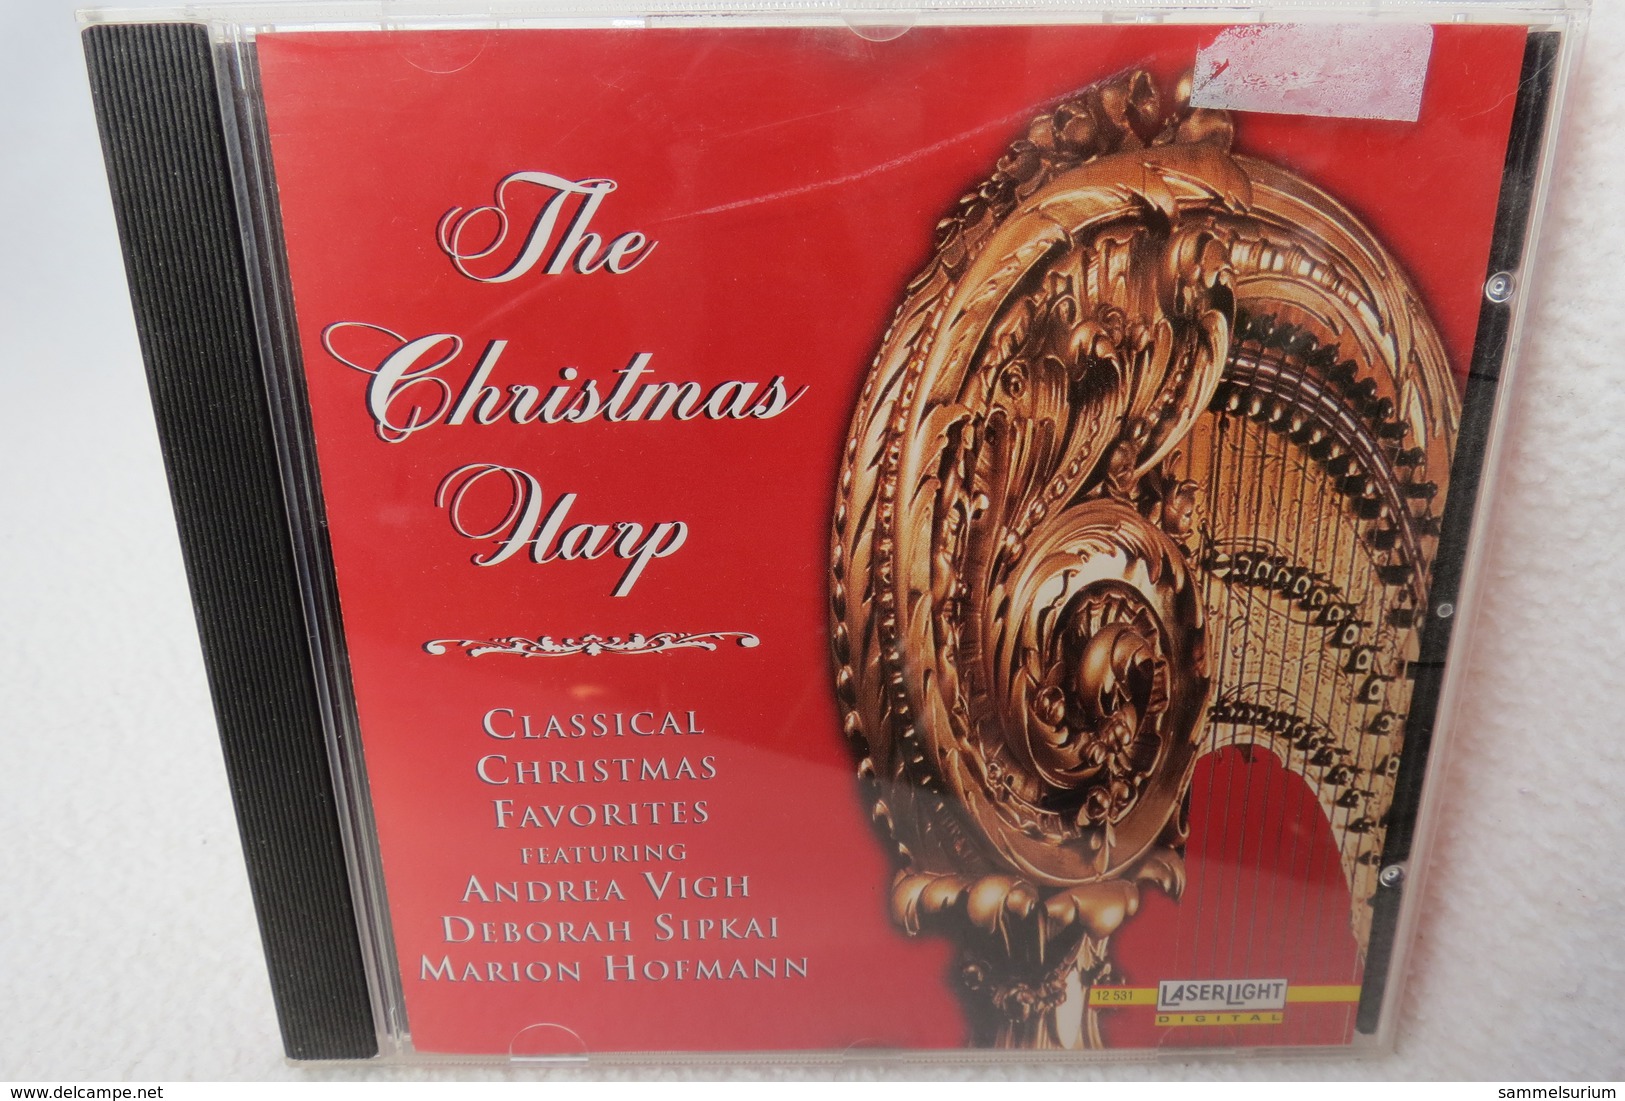 CD "The Christmas Harp" Classical Christmas Favorites - Weihnachtslieder